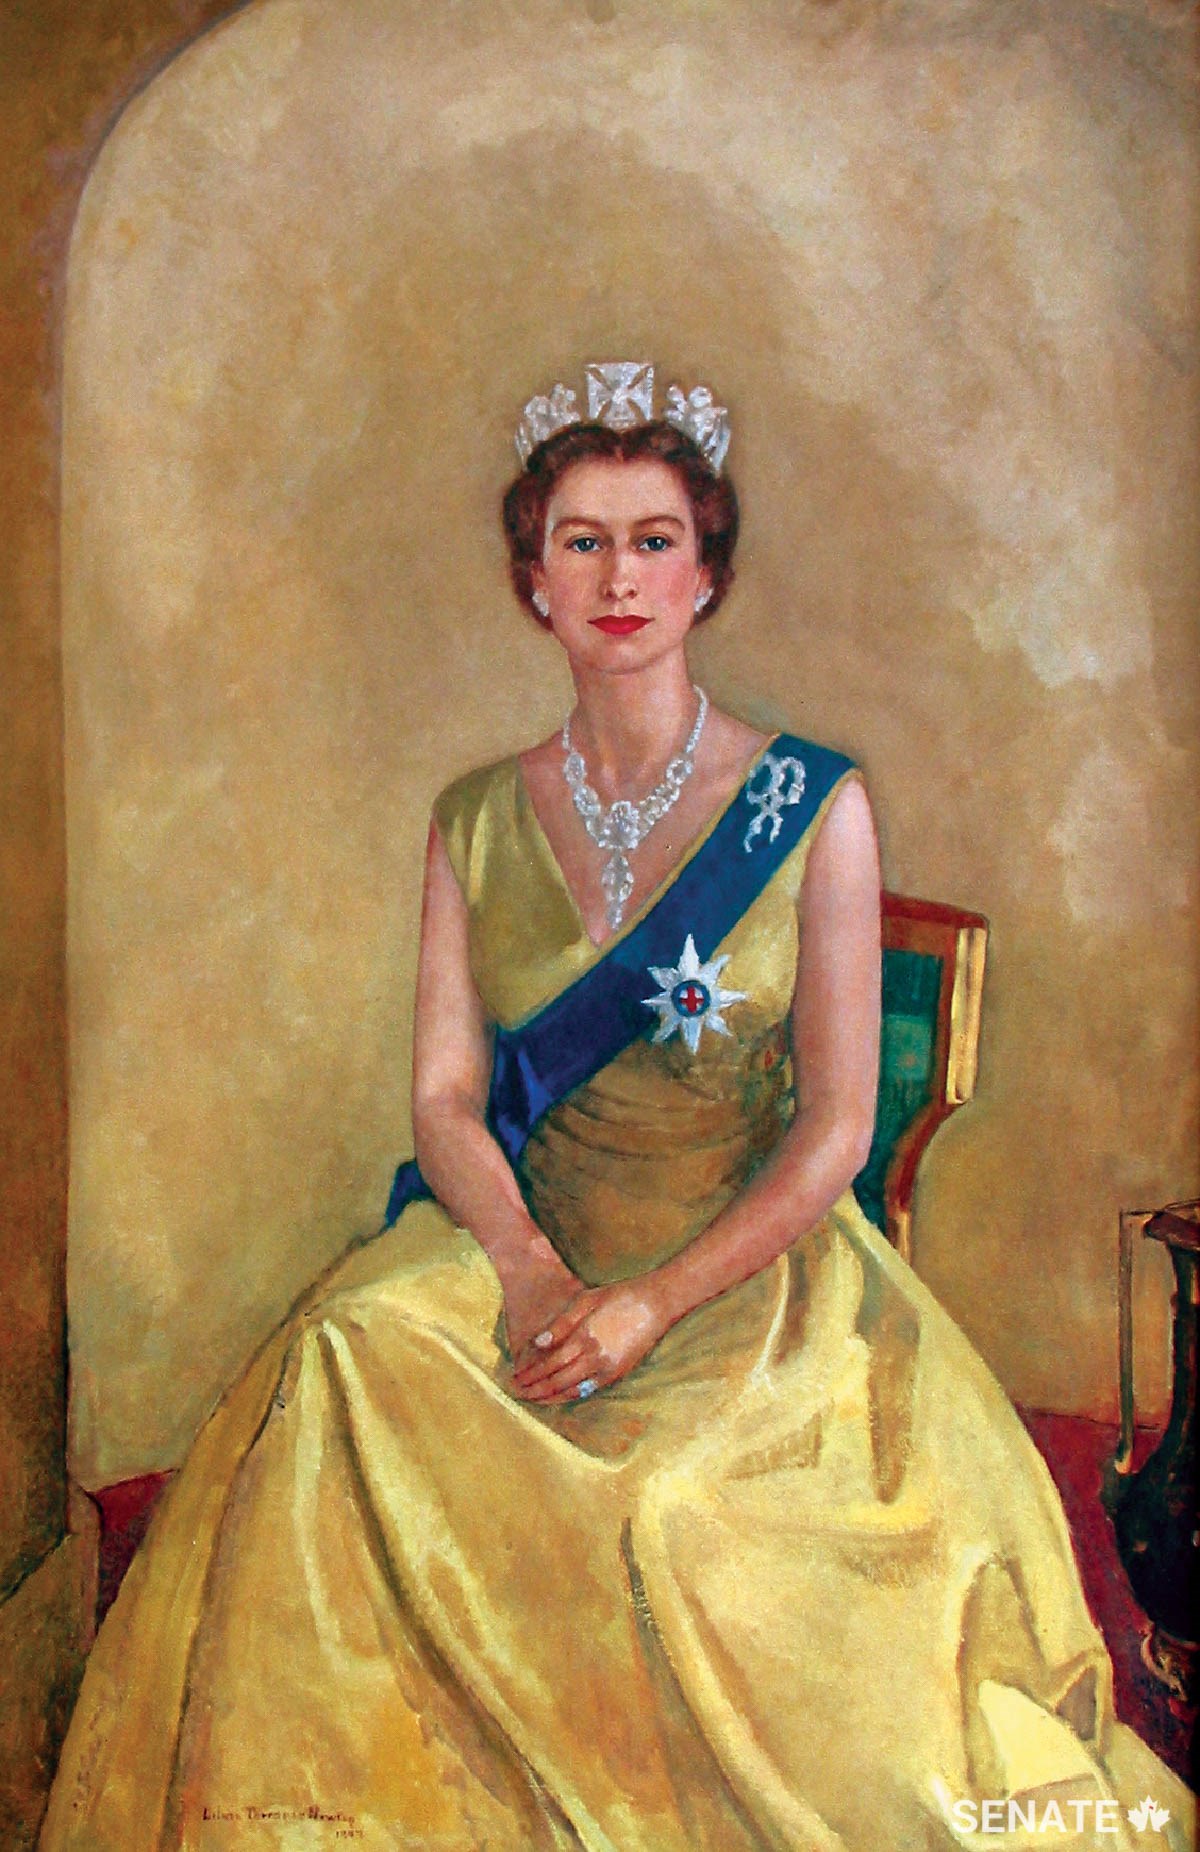 Montreal artist Lilias Torrance Newton painted this 1957 portrait of Queen Elizabeth II, which is on loan from the National Capital Commission’s Crown Collection of the Official Residences and hangs in the main entrance of the Senate of Canada Building. (Image courtesy of the National Capital Commission)